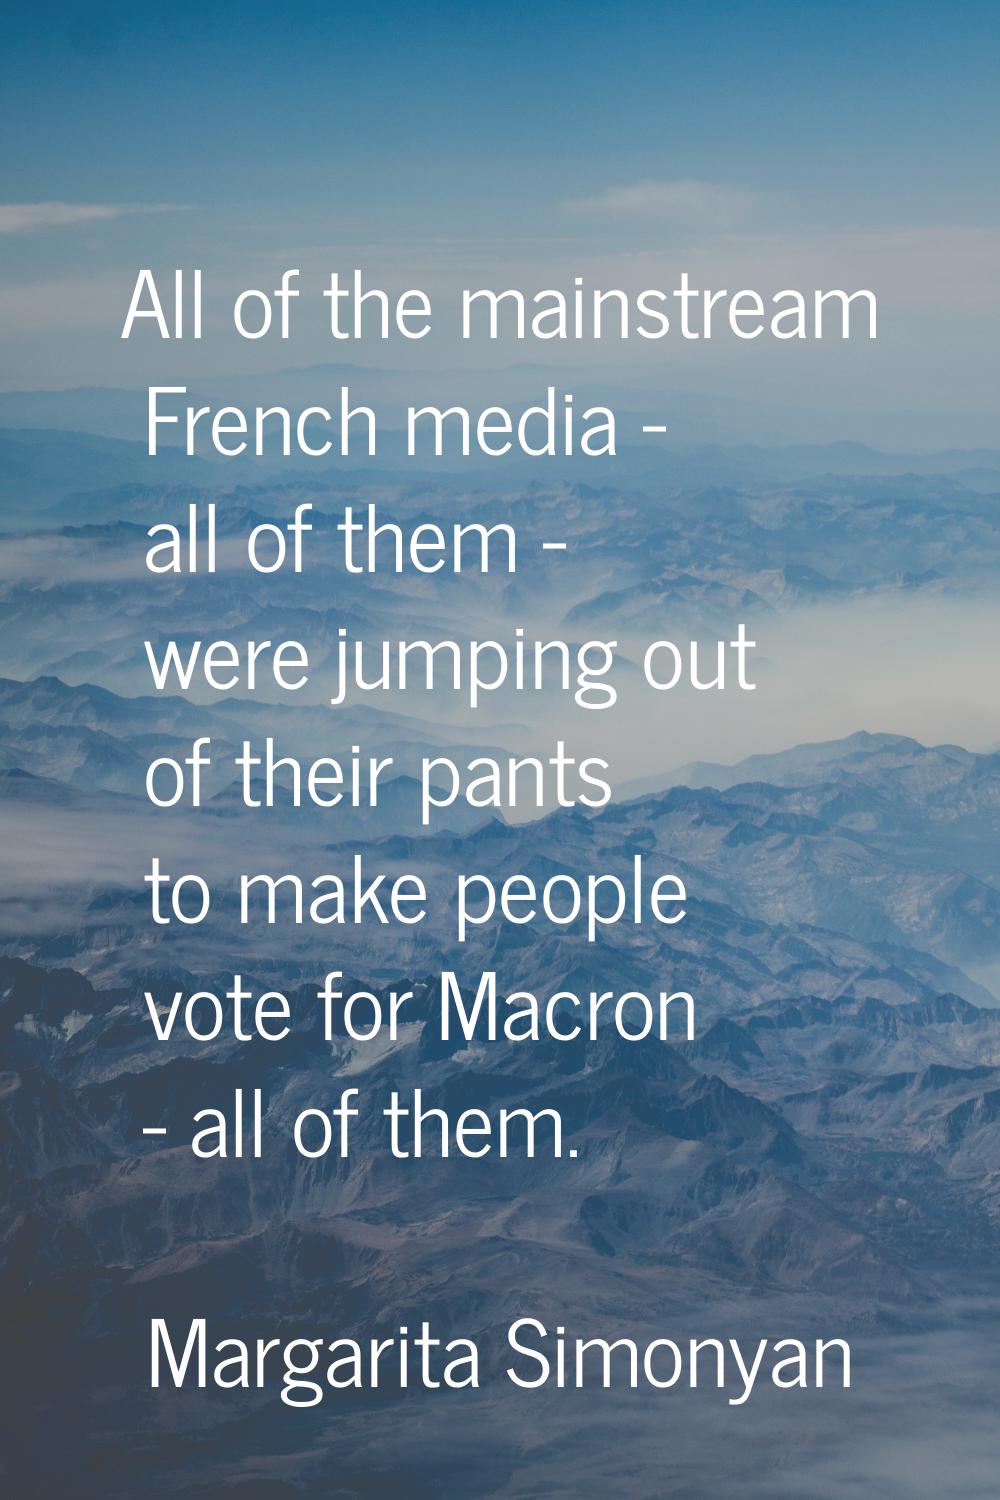 All of the mainstream French media - all of them - were jumping out of their pants to make people v